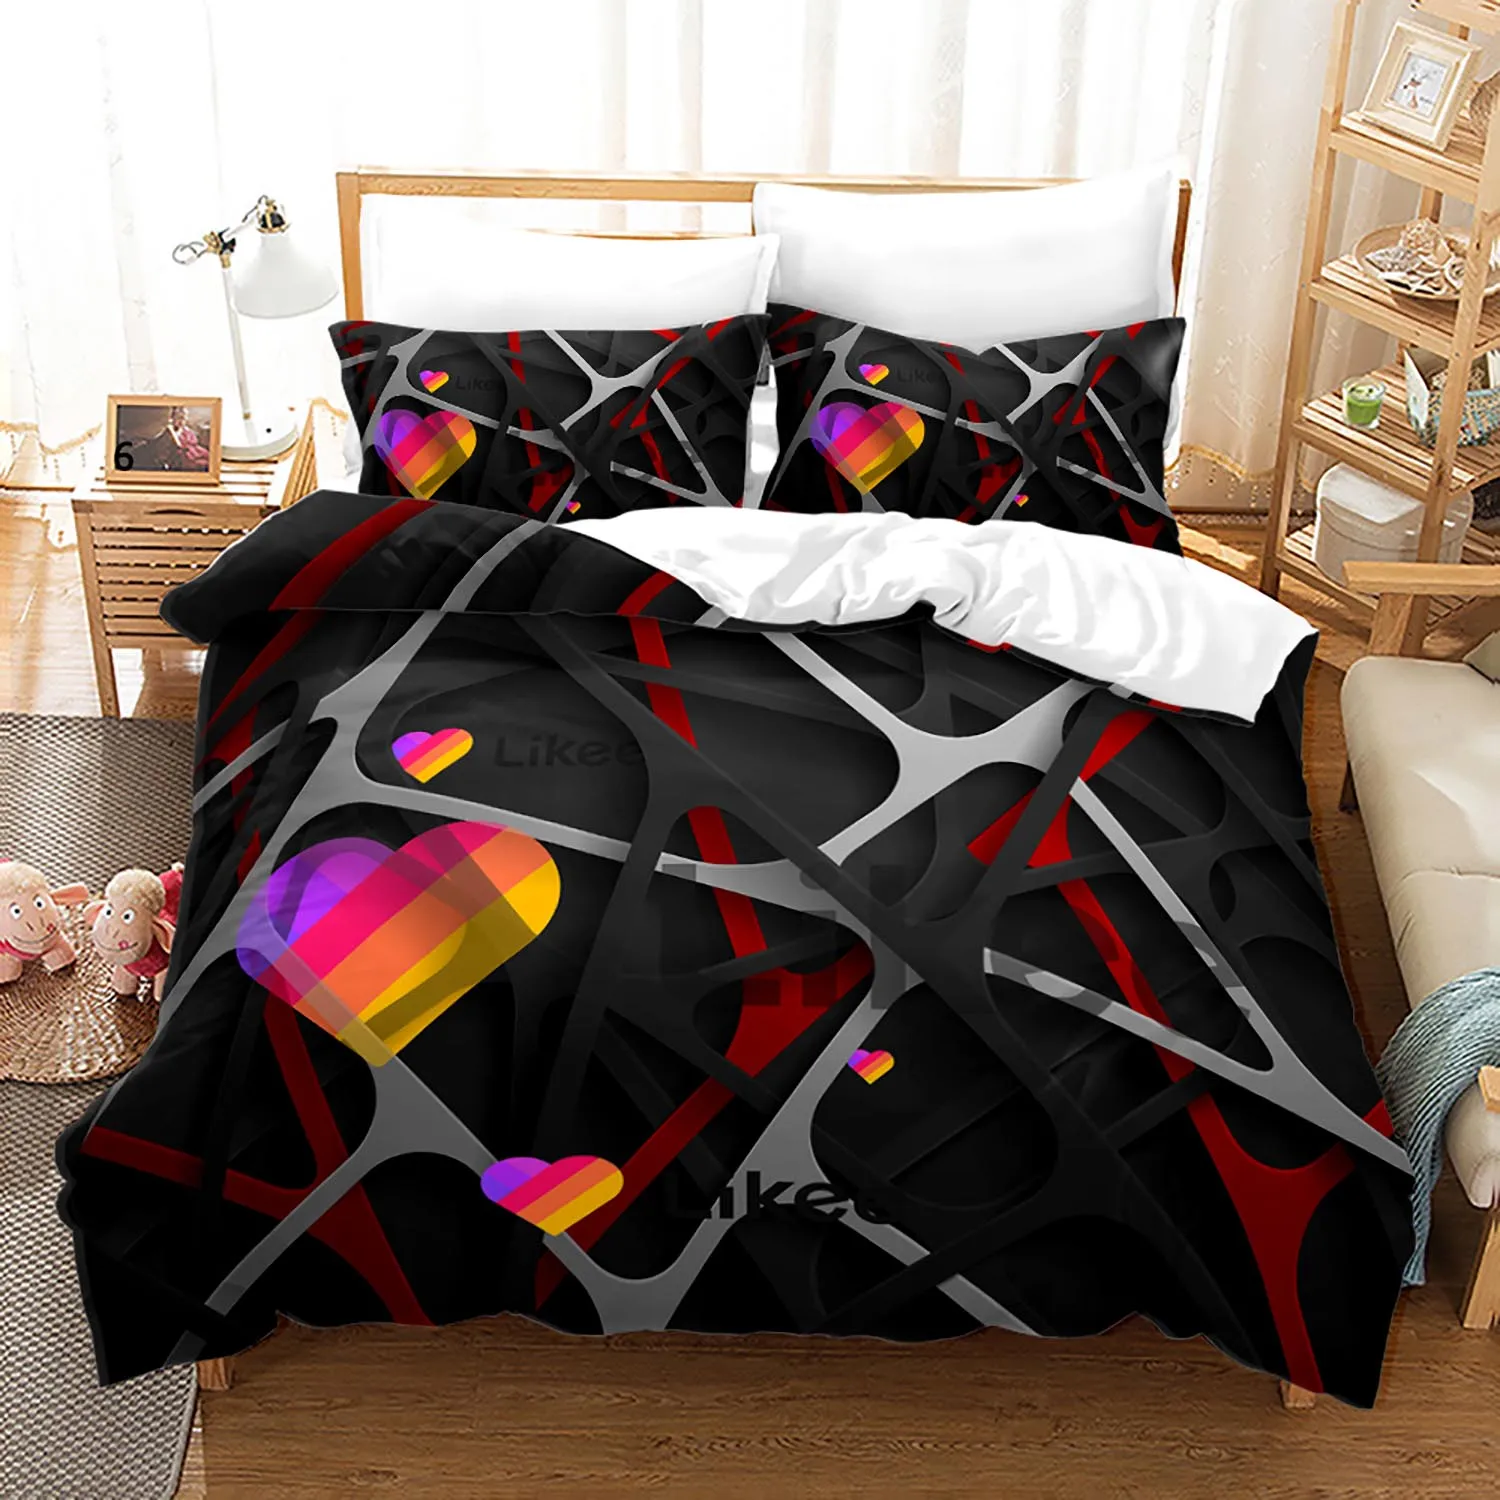 

Likee Bedding Set Single Twin Full Queen King Size Lover Likee Bed Set Aldult Kid Bedroom Duvetcover Sets Heart-shaped 003